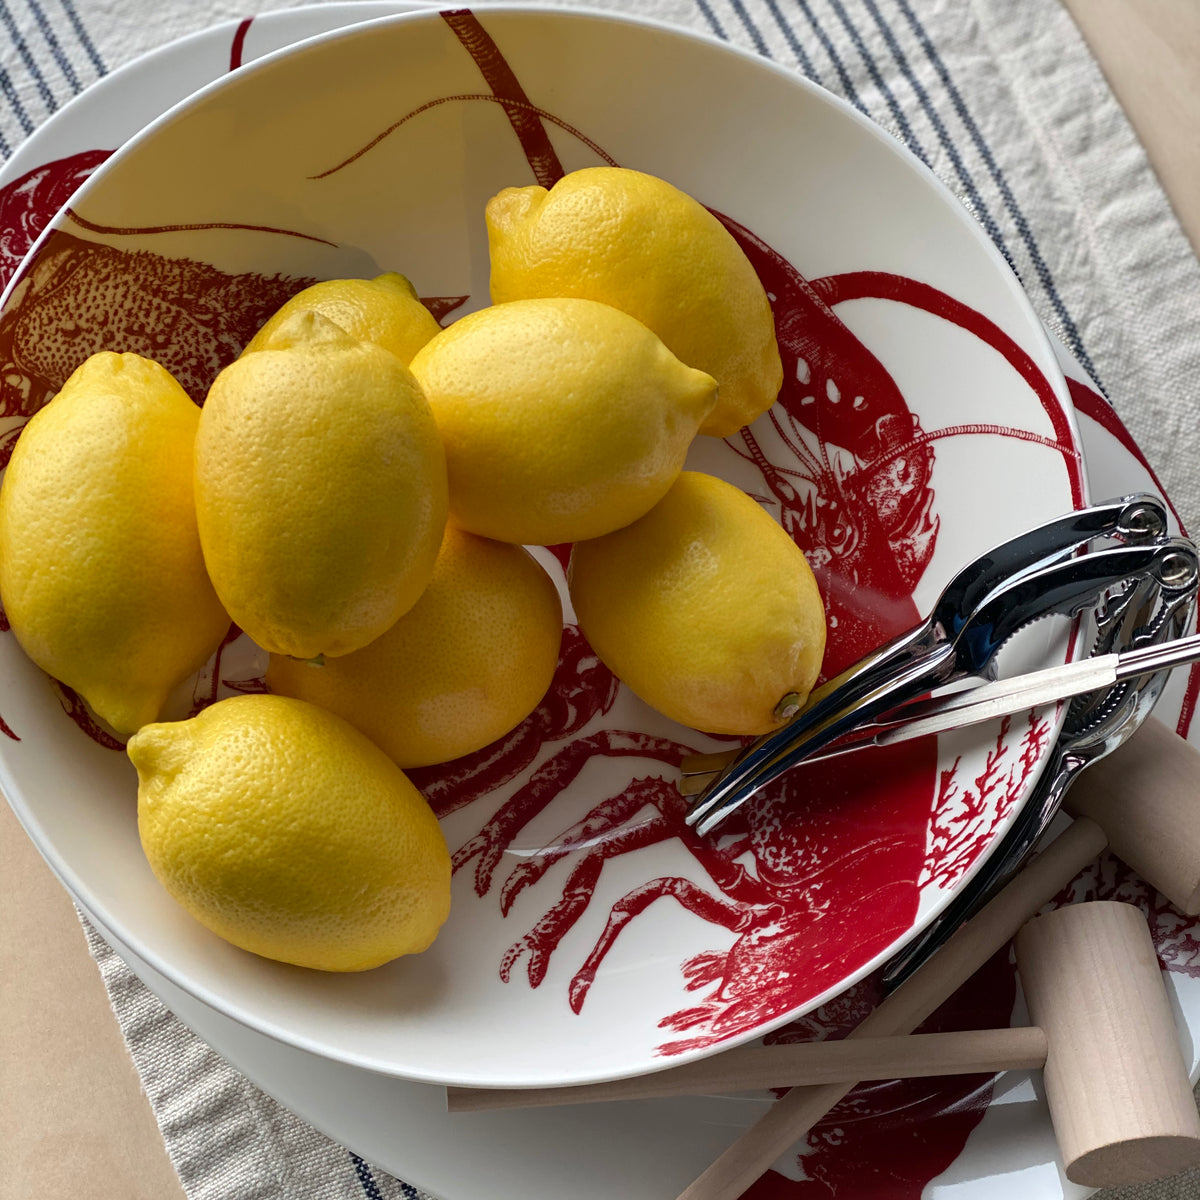 A white plate with a red lobster print holds several yellow lemons and a metal citrus juicer. The plate is placed on a striped tablecloth, perfectly complementing the July Fourth Bundle by Caskata nearby.